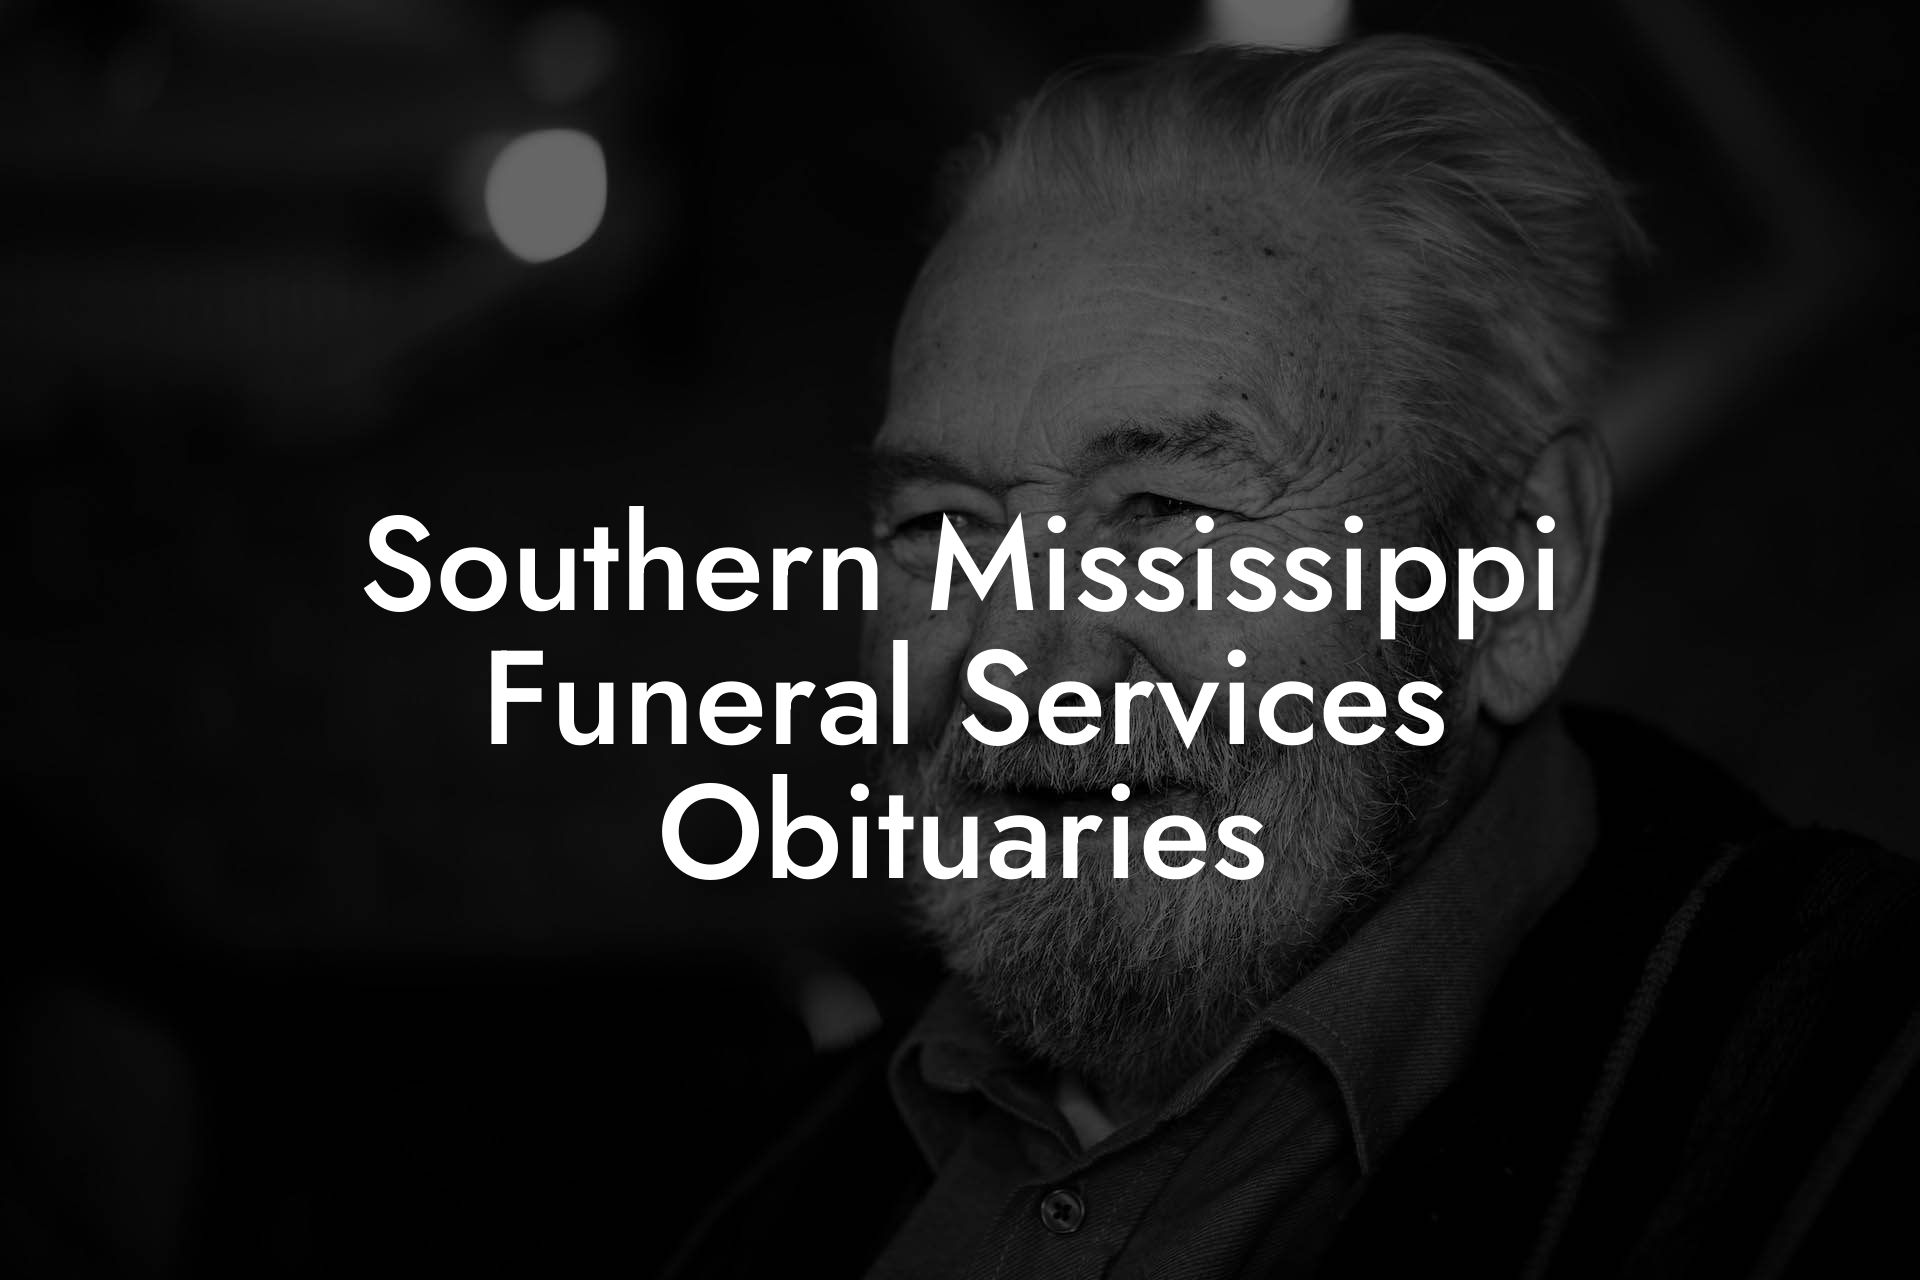 Southern Mississippi Funeral Services Obituaries